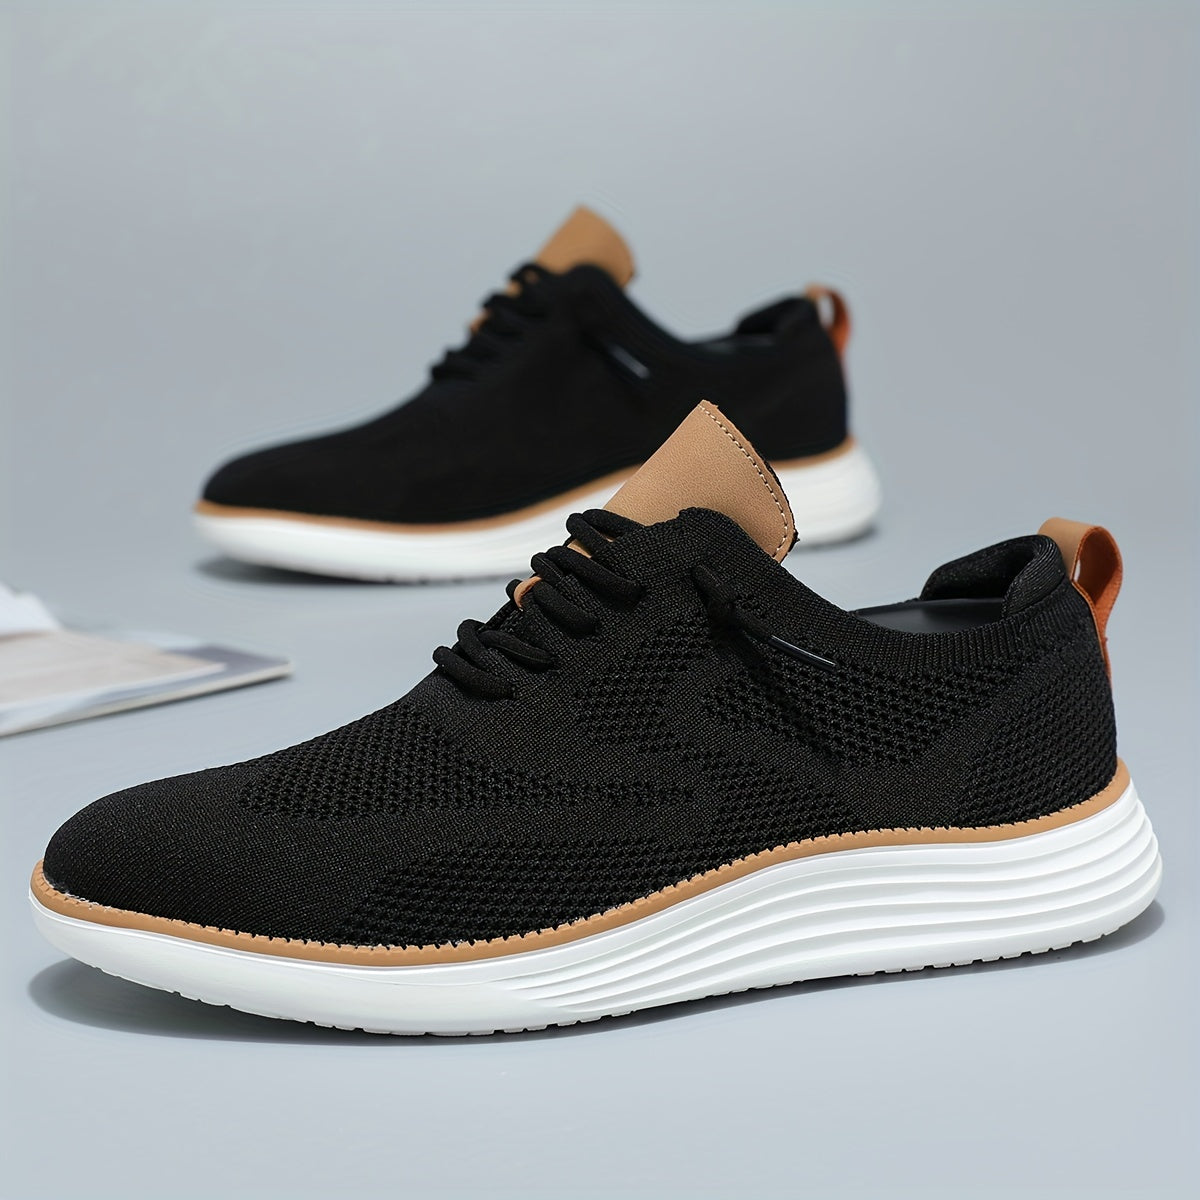 Men's Lightweight Athletic Sneakers - Breathable Lace-Up Shoes